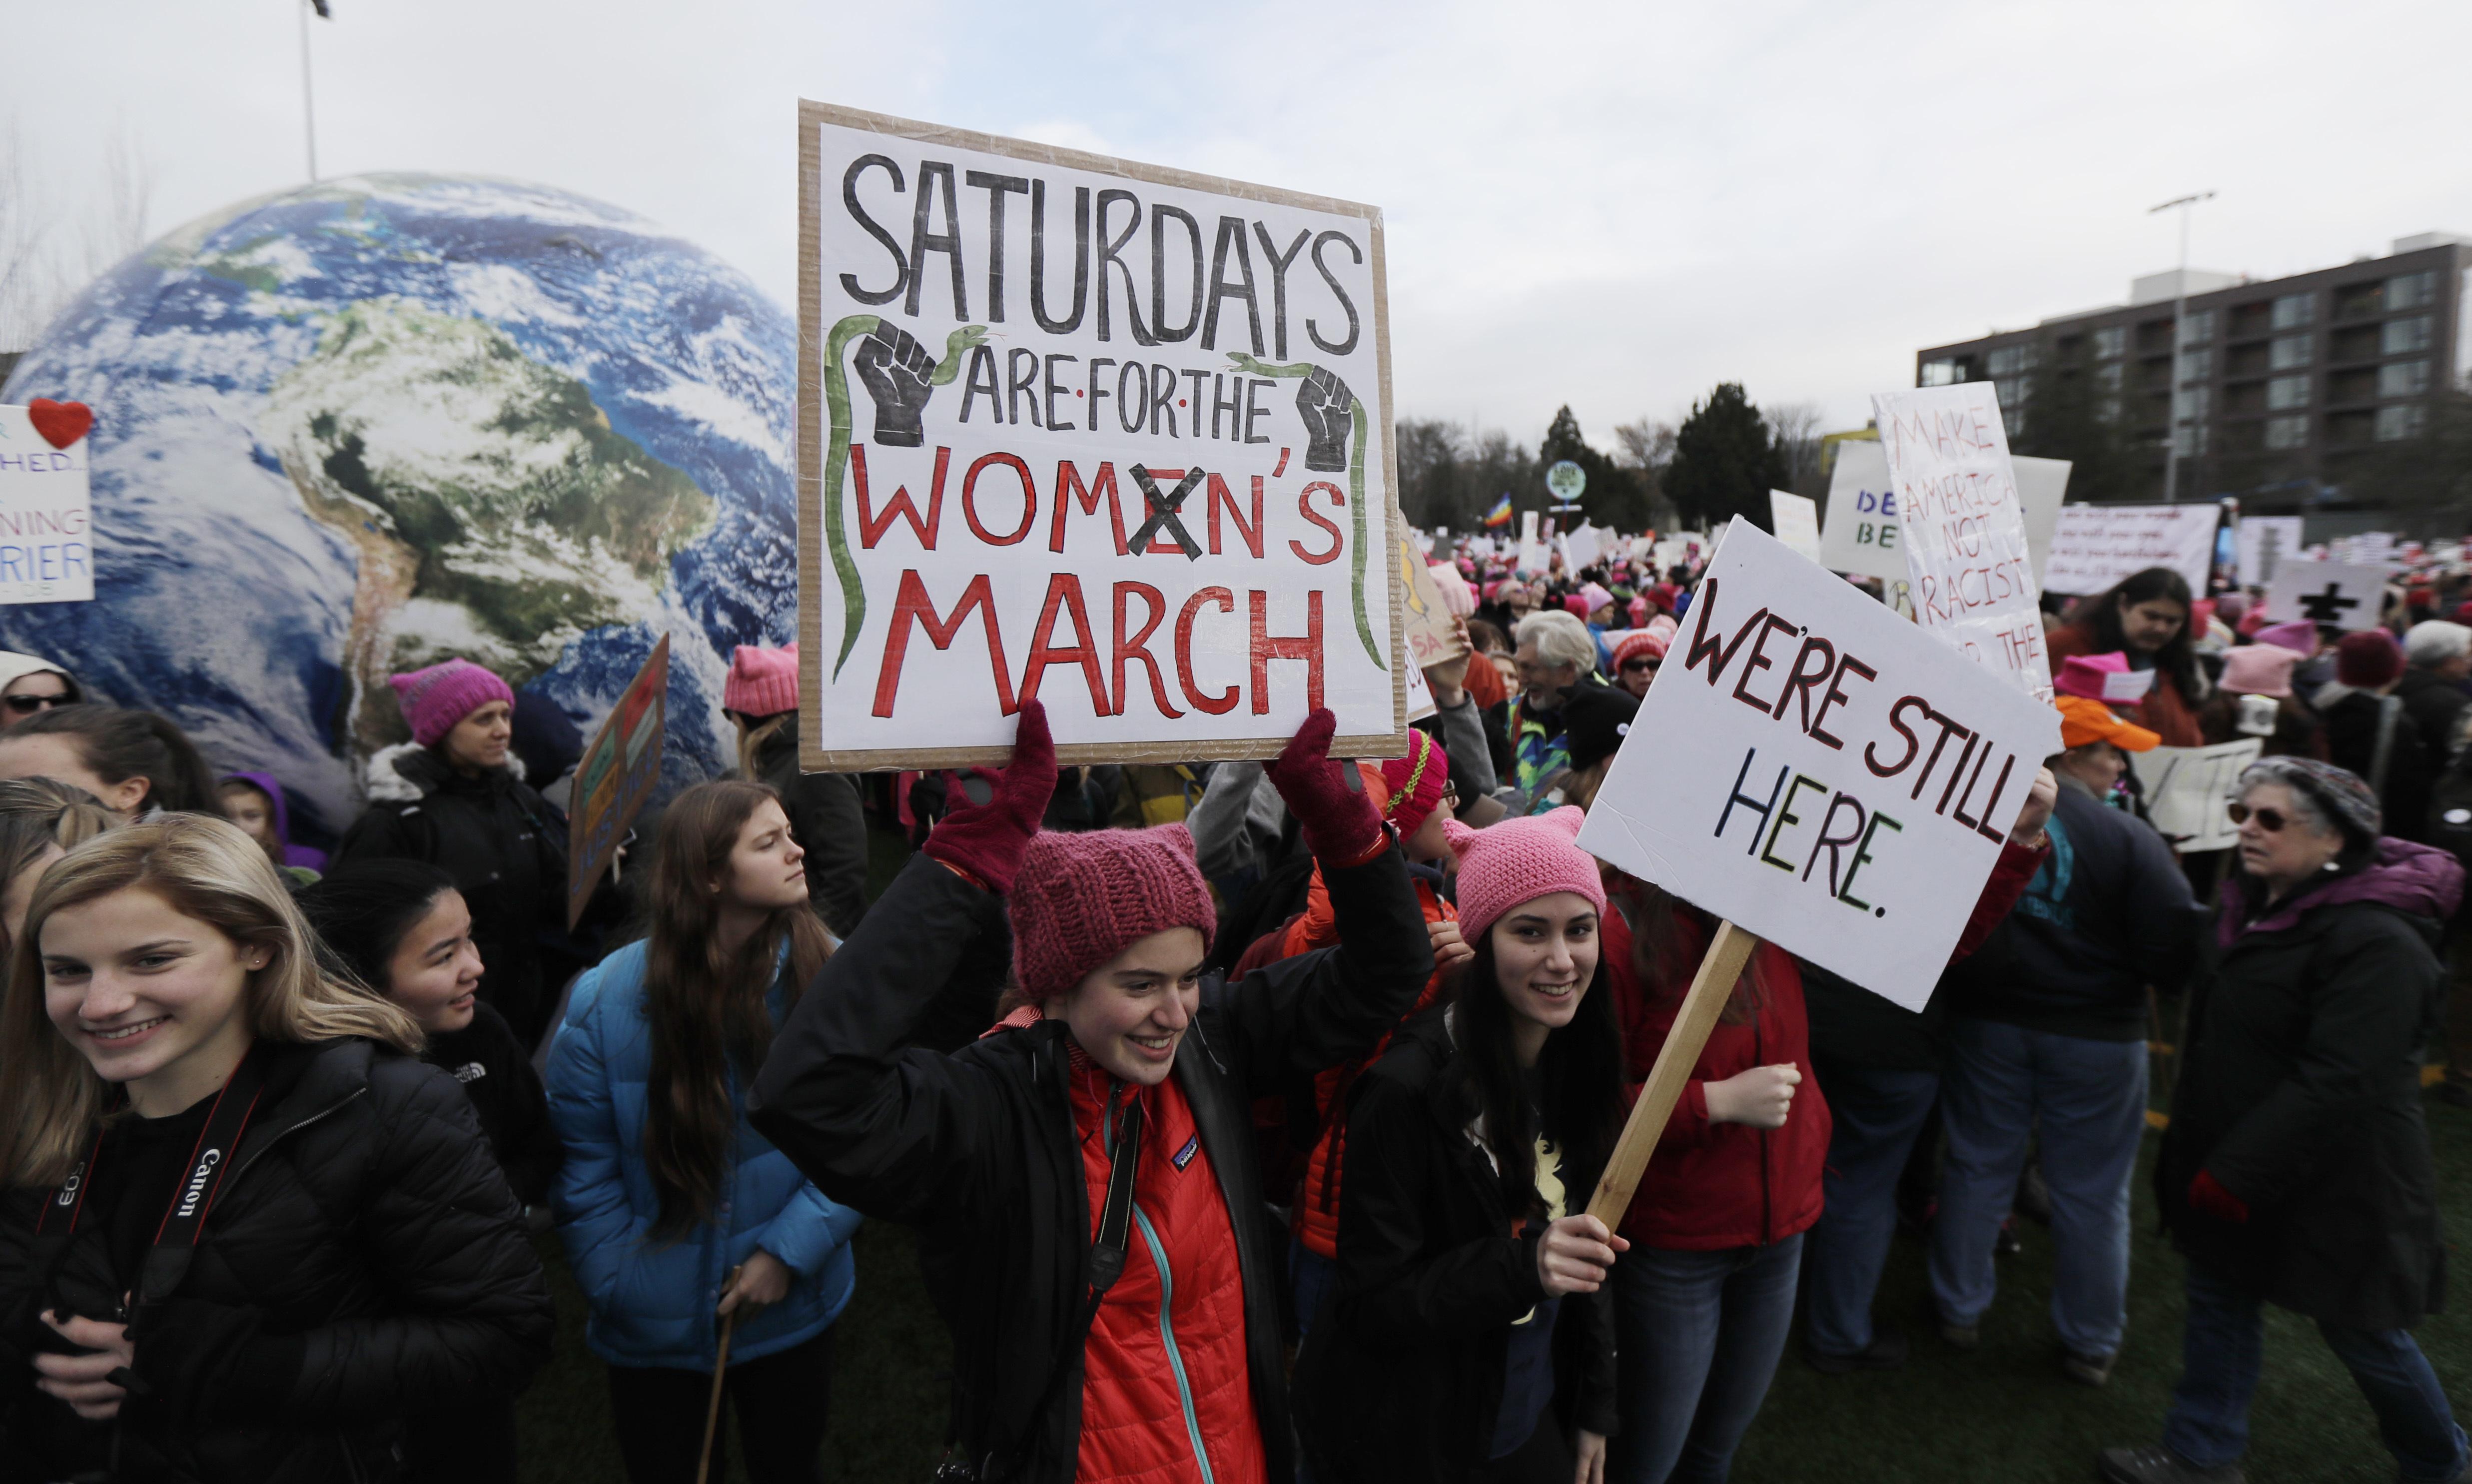 Big crowd turns out for Seattle women’s march, man arrested | The Spokesman-Review4947 x 2970